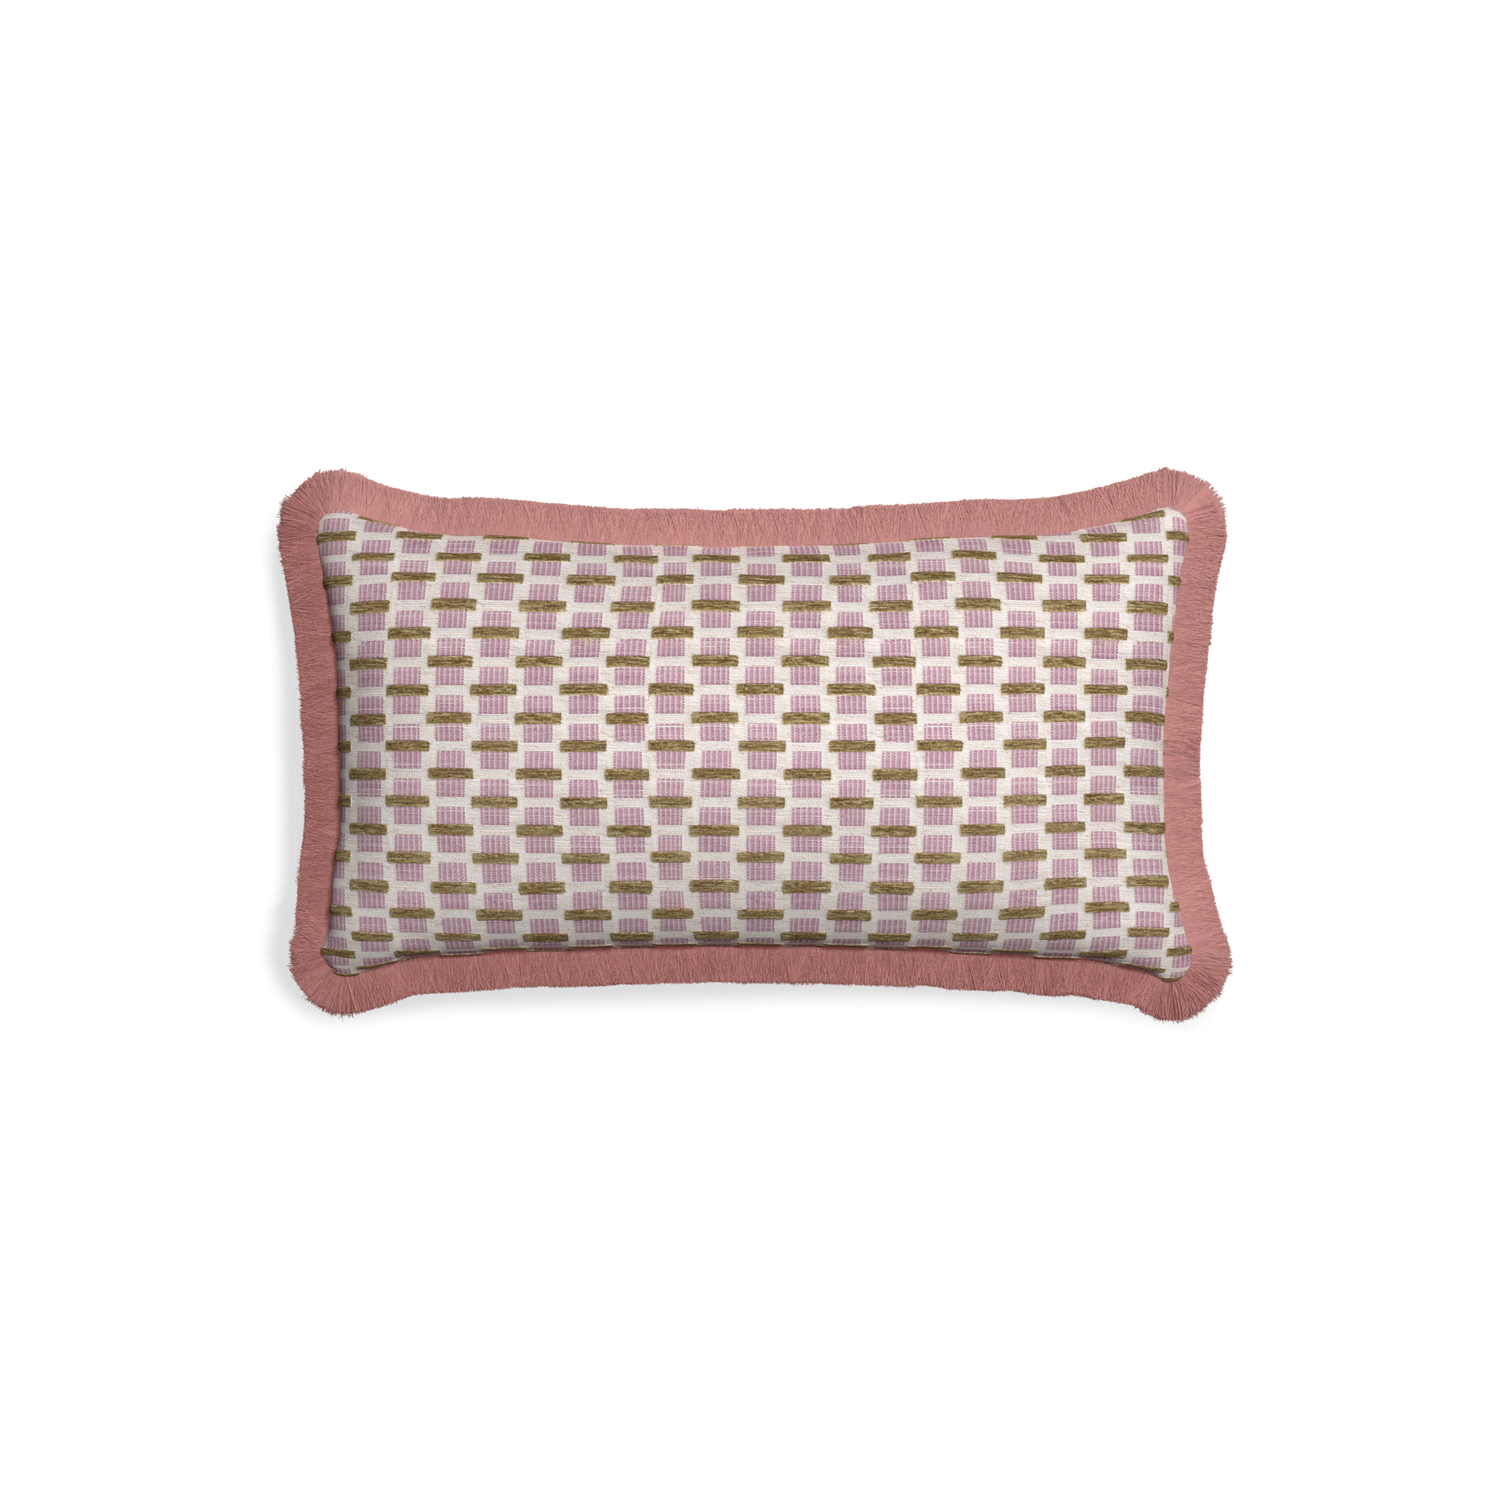 Petite-lumbar willow orchid custom pink geometric chenillepillow with d fringe on white background